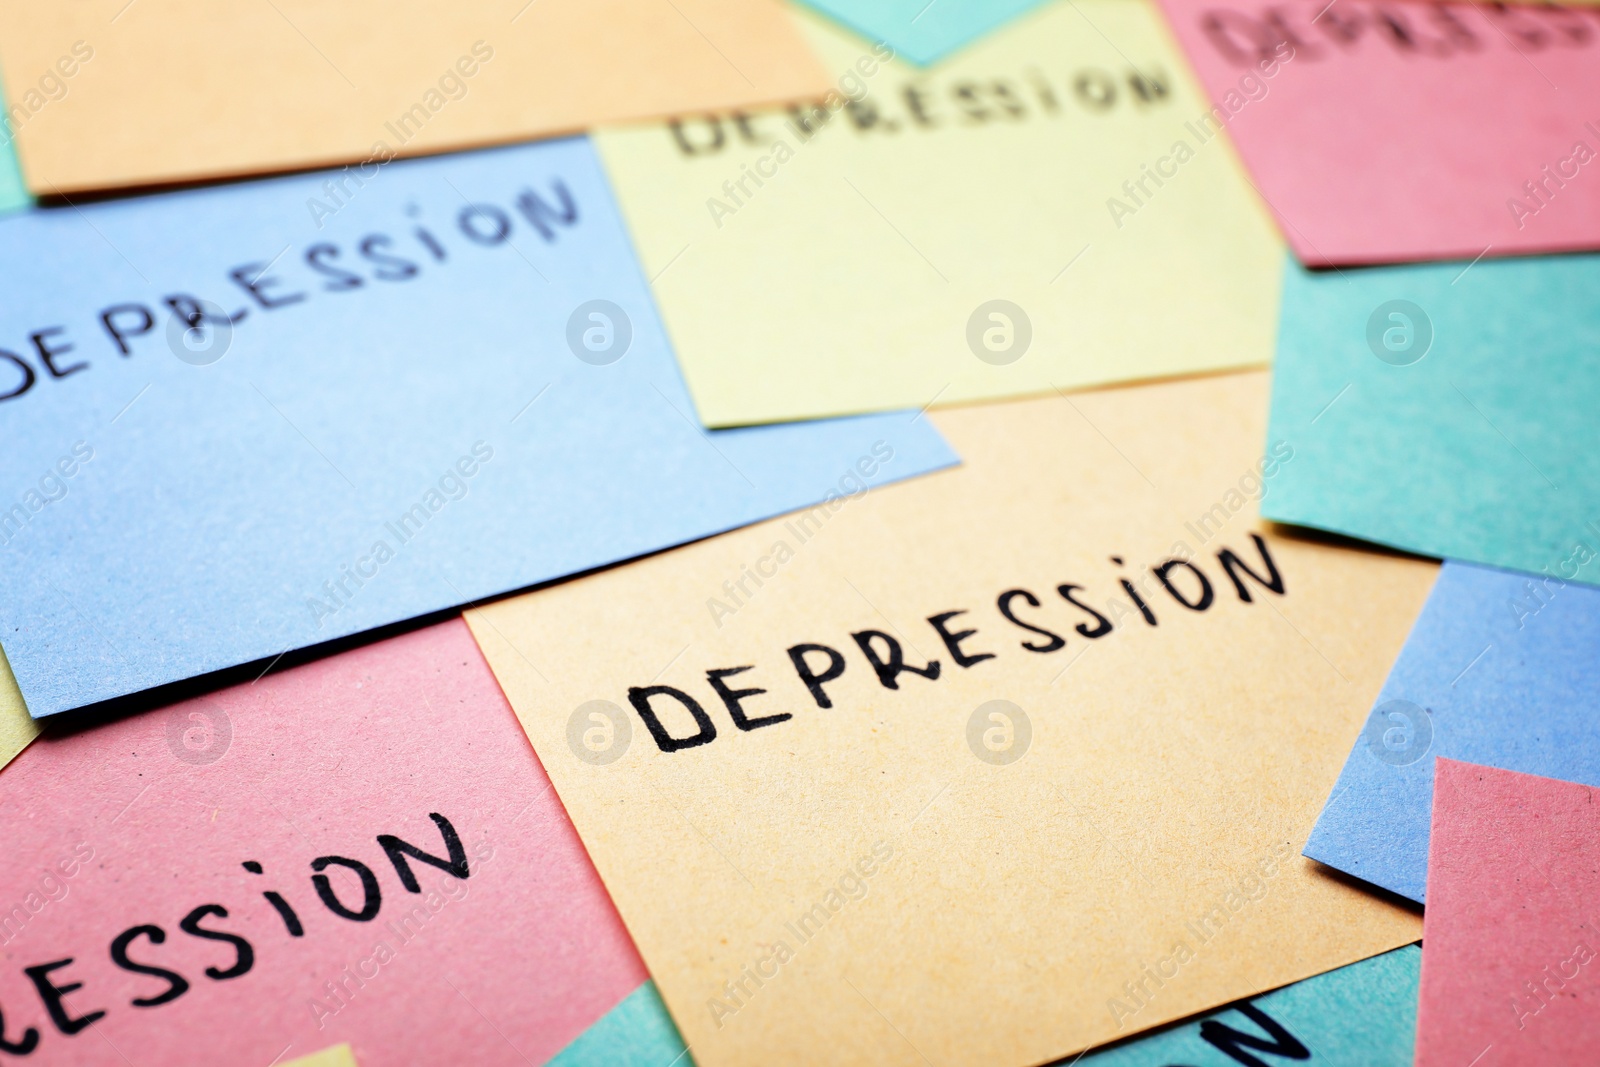 Photo of Many sticky notes with written words Depression as background